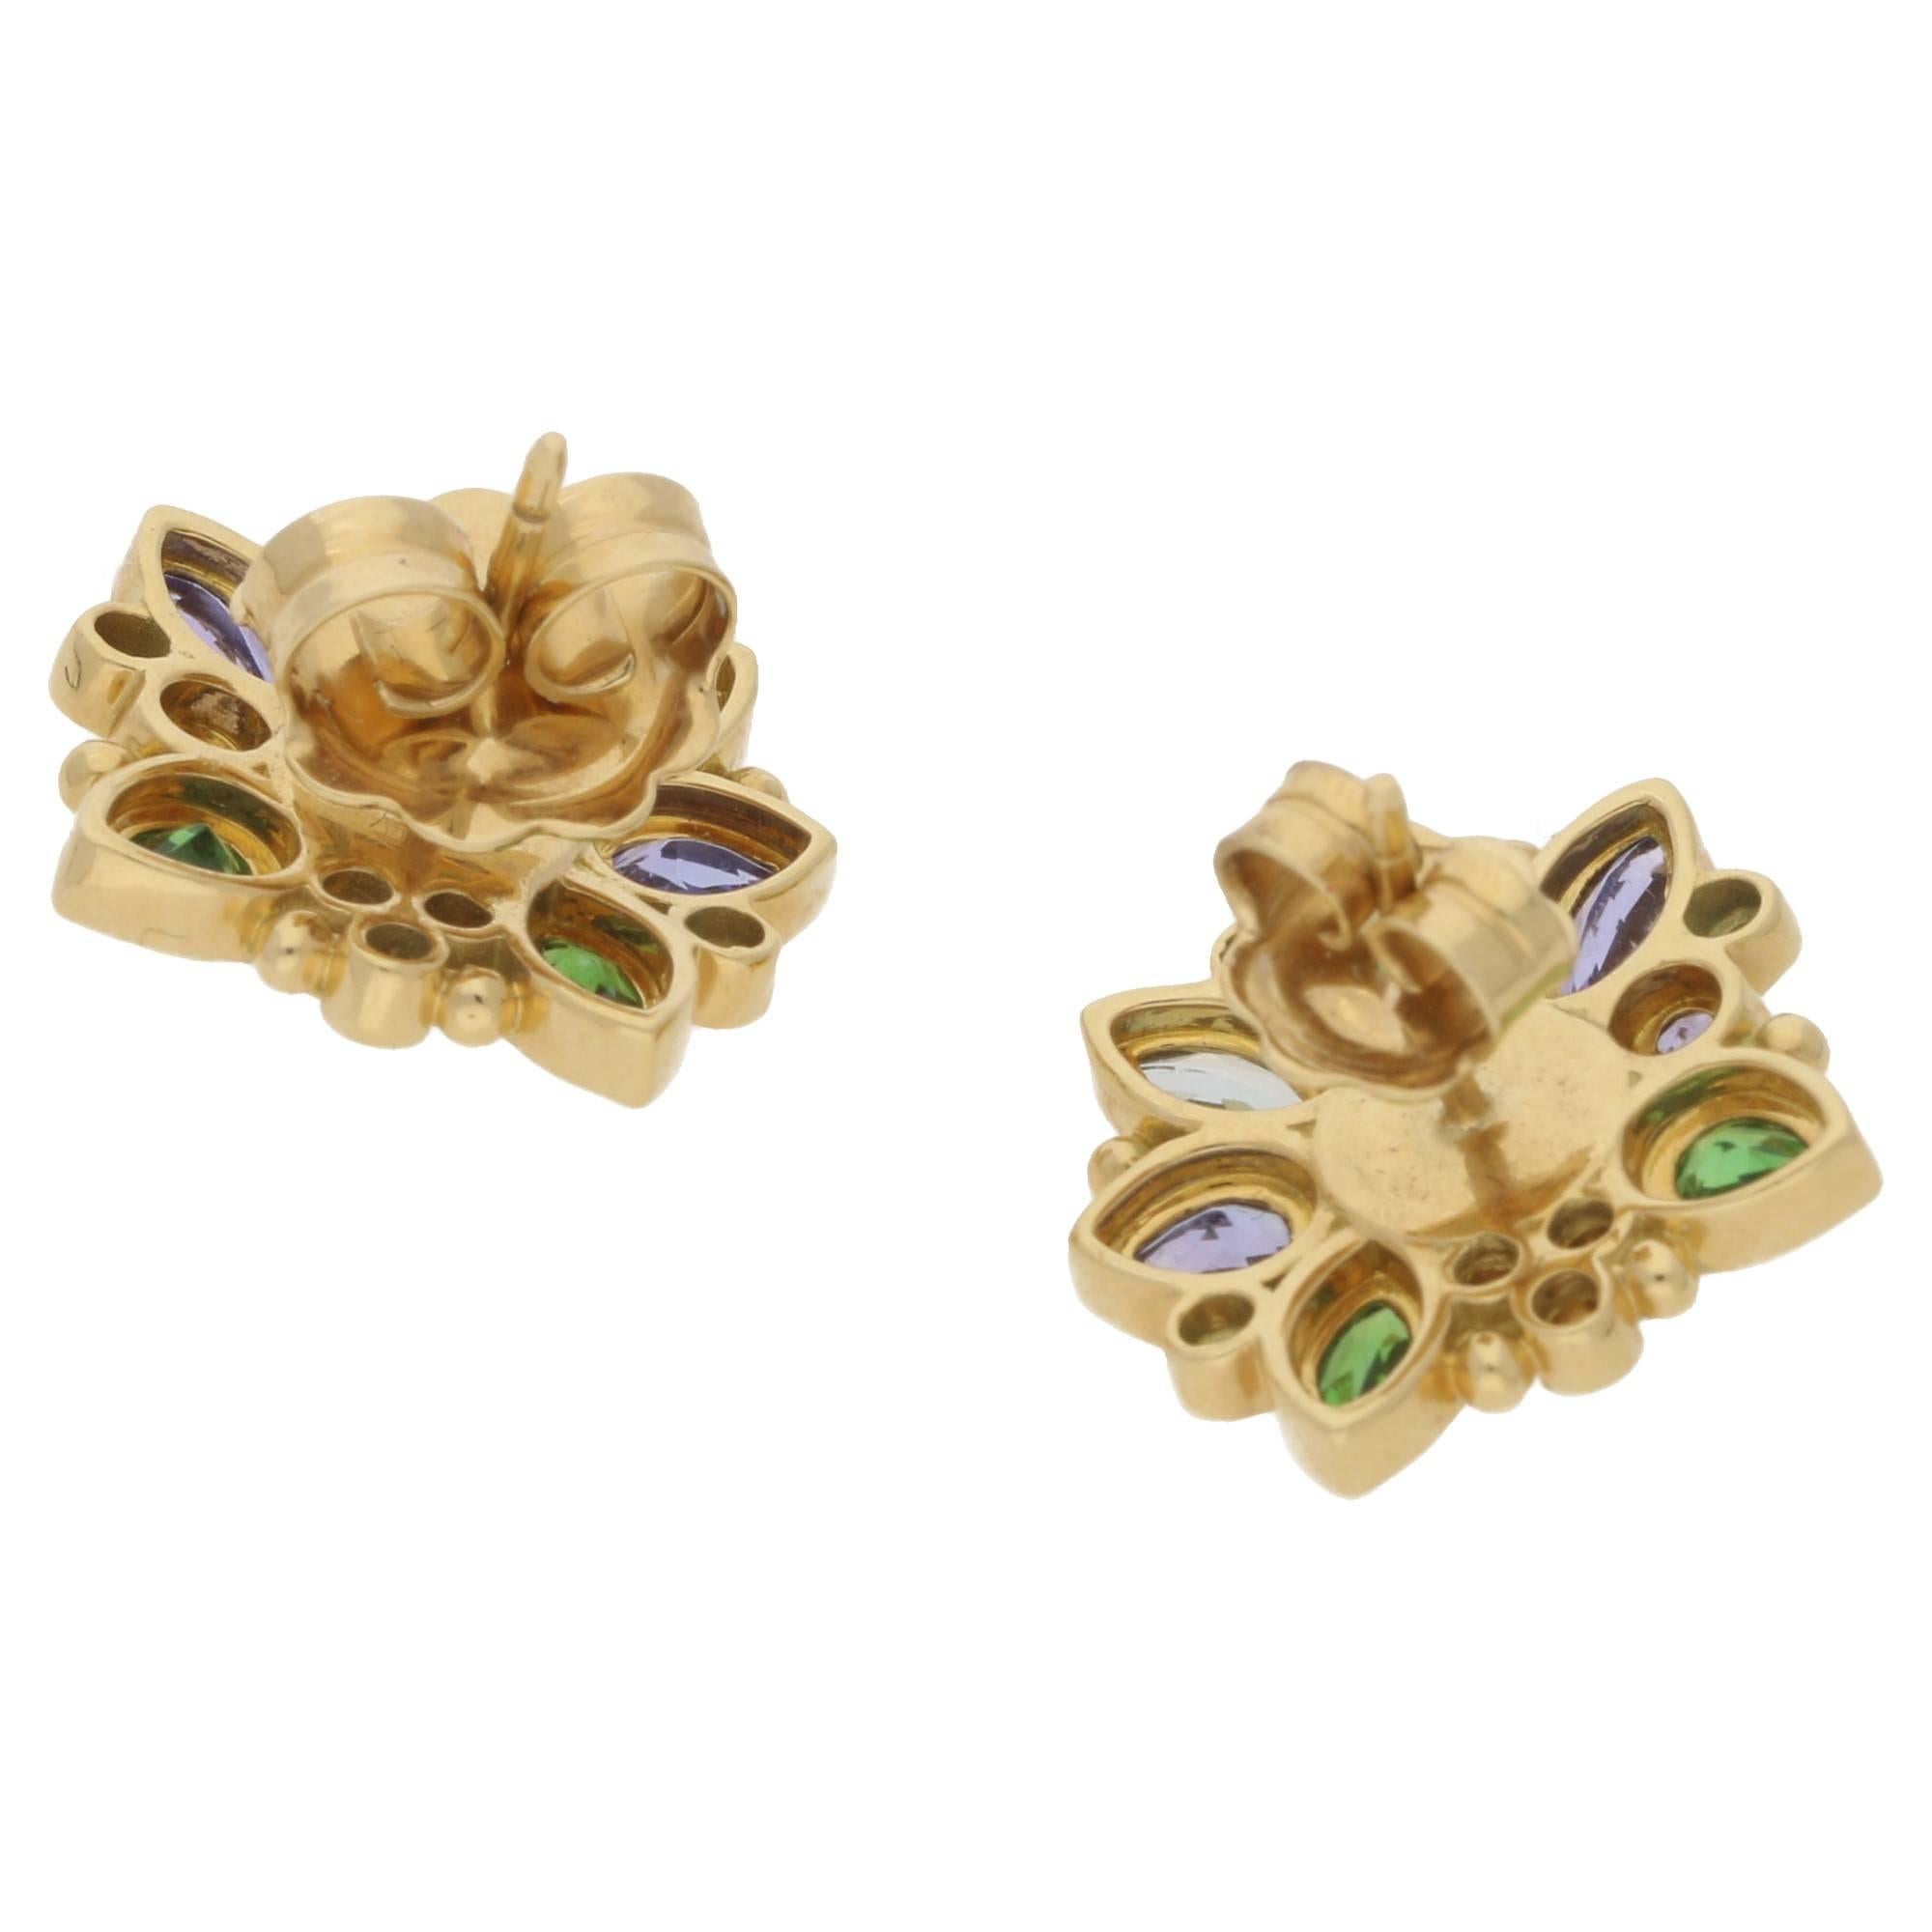 Temple St Clair for Anima collection stud earrings set in 18ct yellow gold, featuring rubover set moonstone, tsavorite garnets, tanzanite, aquamarine and diamonds in a cluster design with signature granulation, to a post and butterfly fitting.